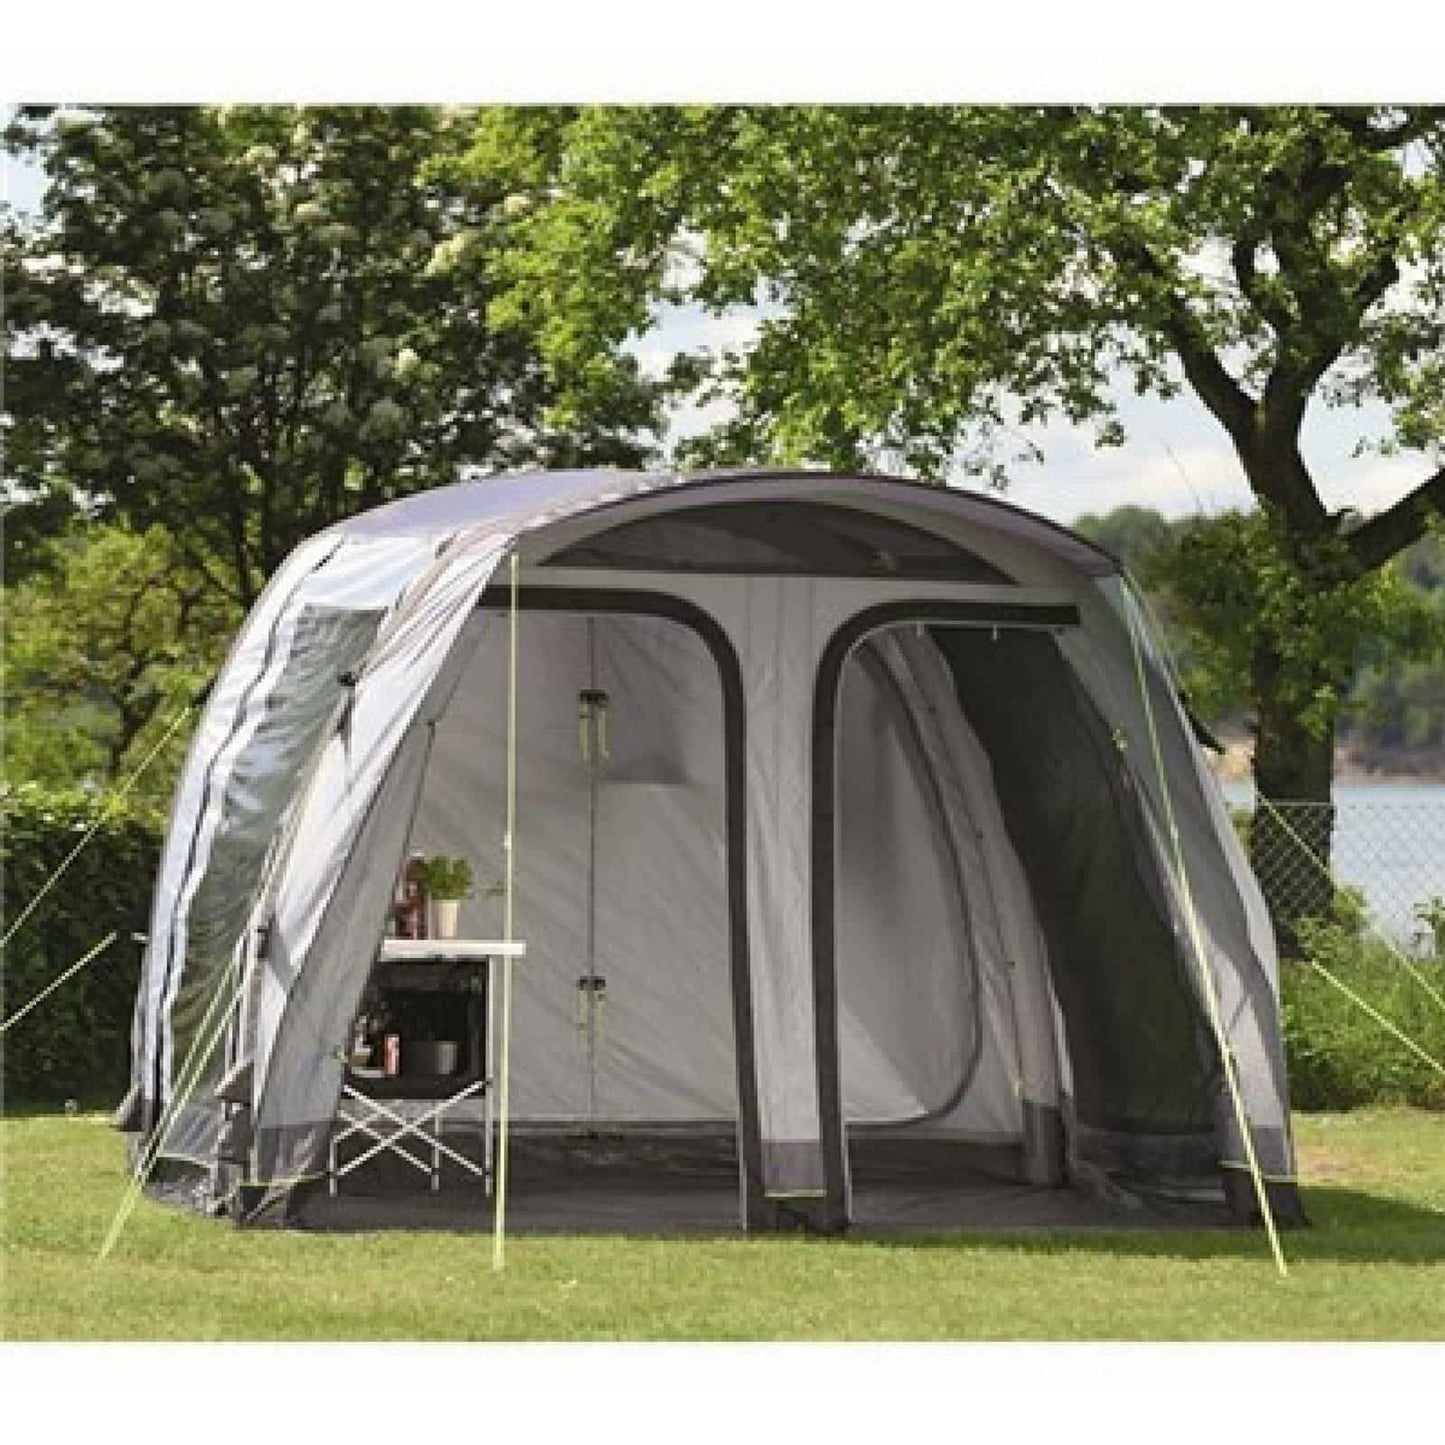 Outwell Country Road Smart Air Driveaway Awning (2018 Edition) - Quality Caravan Awnings